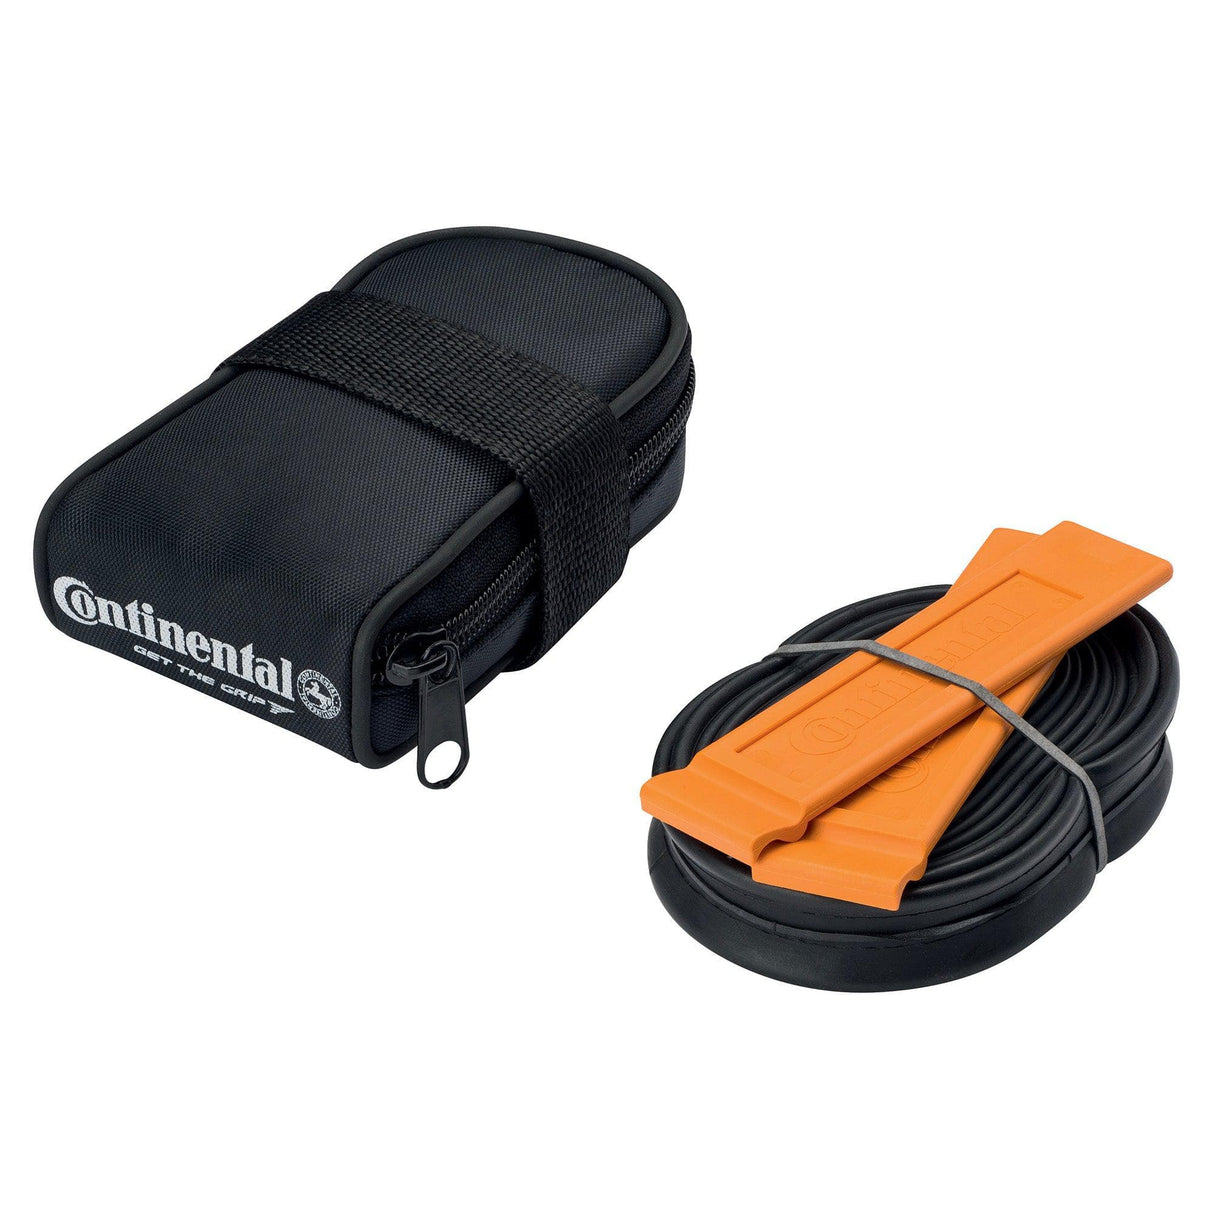 Continental Road Saddle Bag With Race 700 X 20-25 Presta 48Mm Valve Tube And 2 Tyre Levers: Black